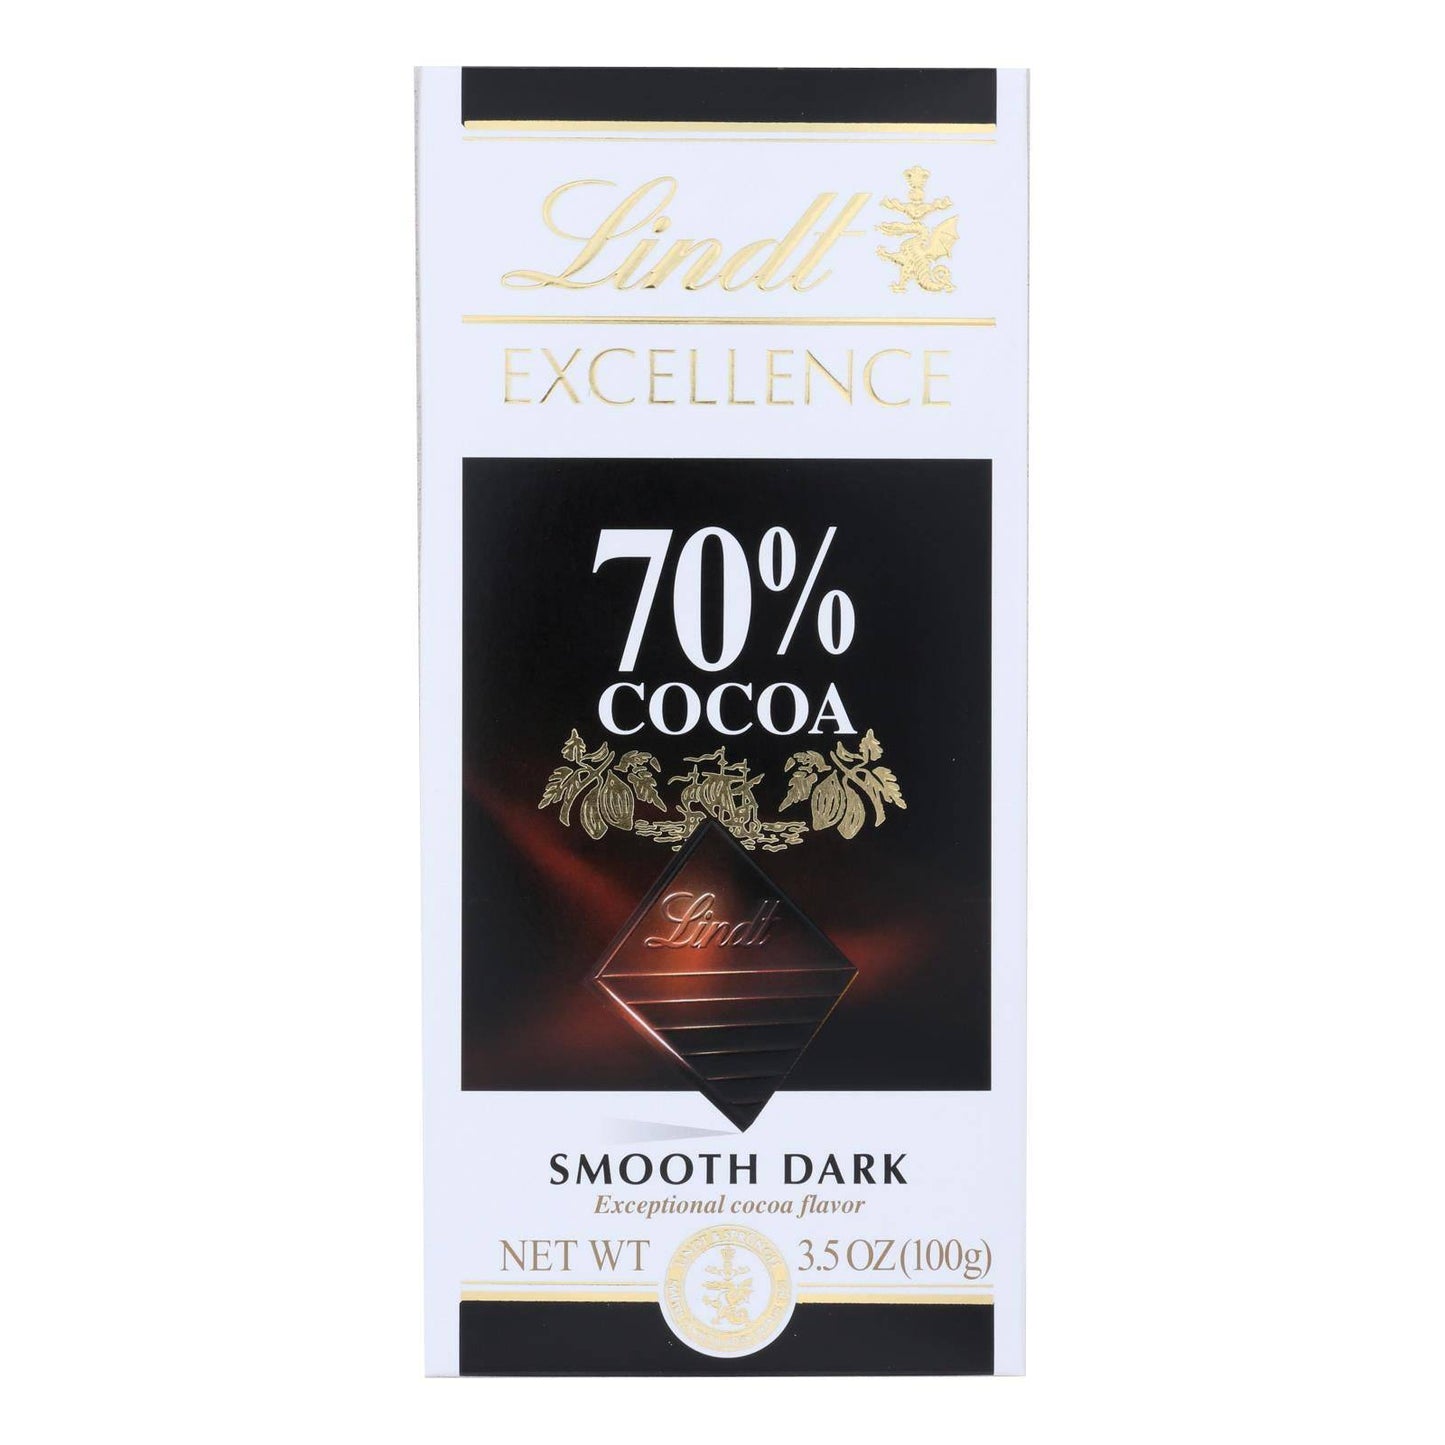 Buy Lindt Chocolate Bar - Dark Chocolate - 70 Percent Cocoa - Smooth - 3.5 Oz Bars - Case Of 12  at OnlyNaturals.us